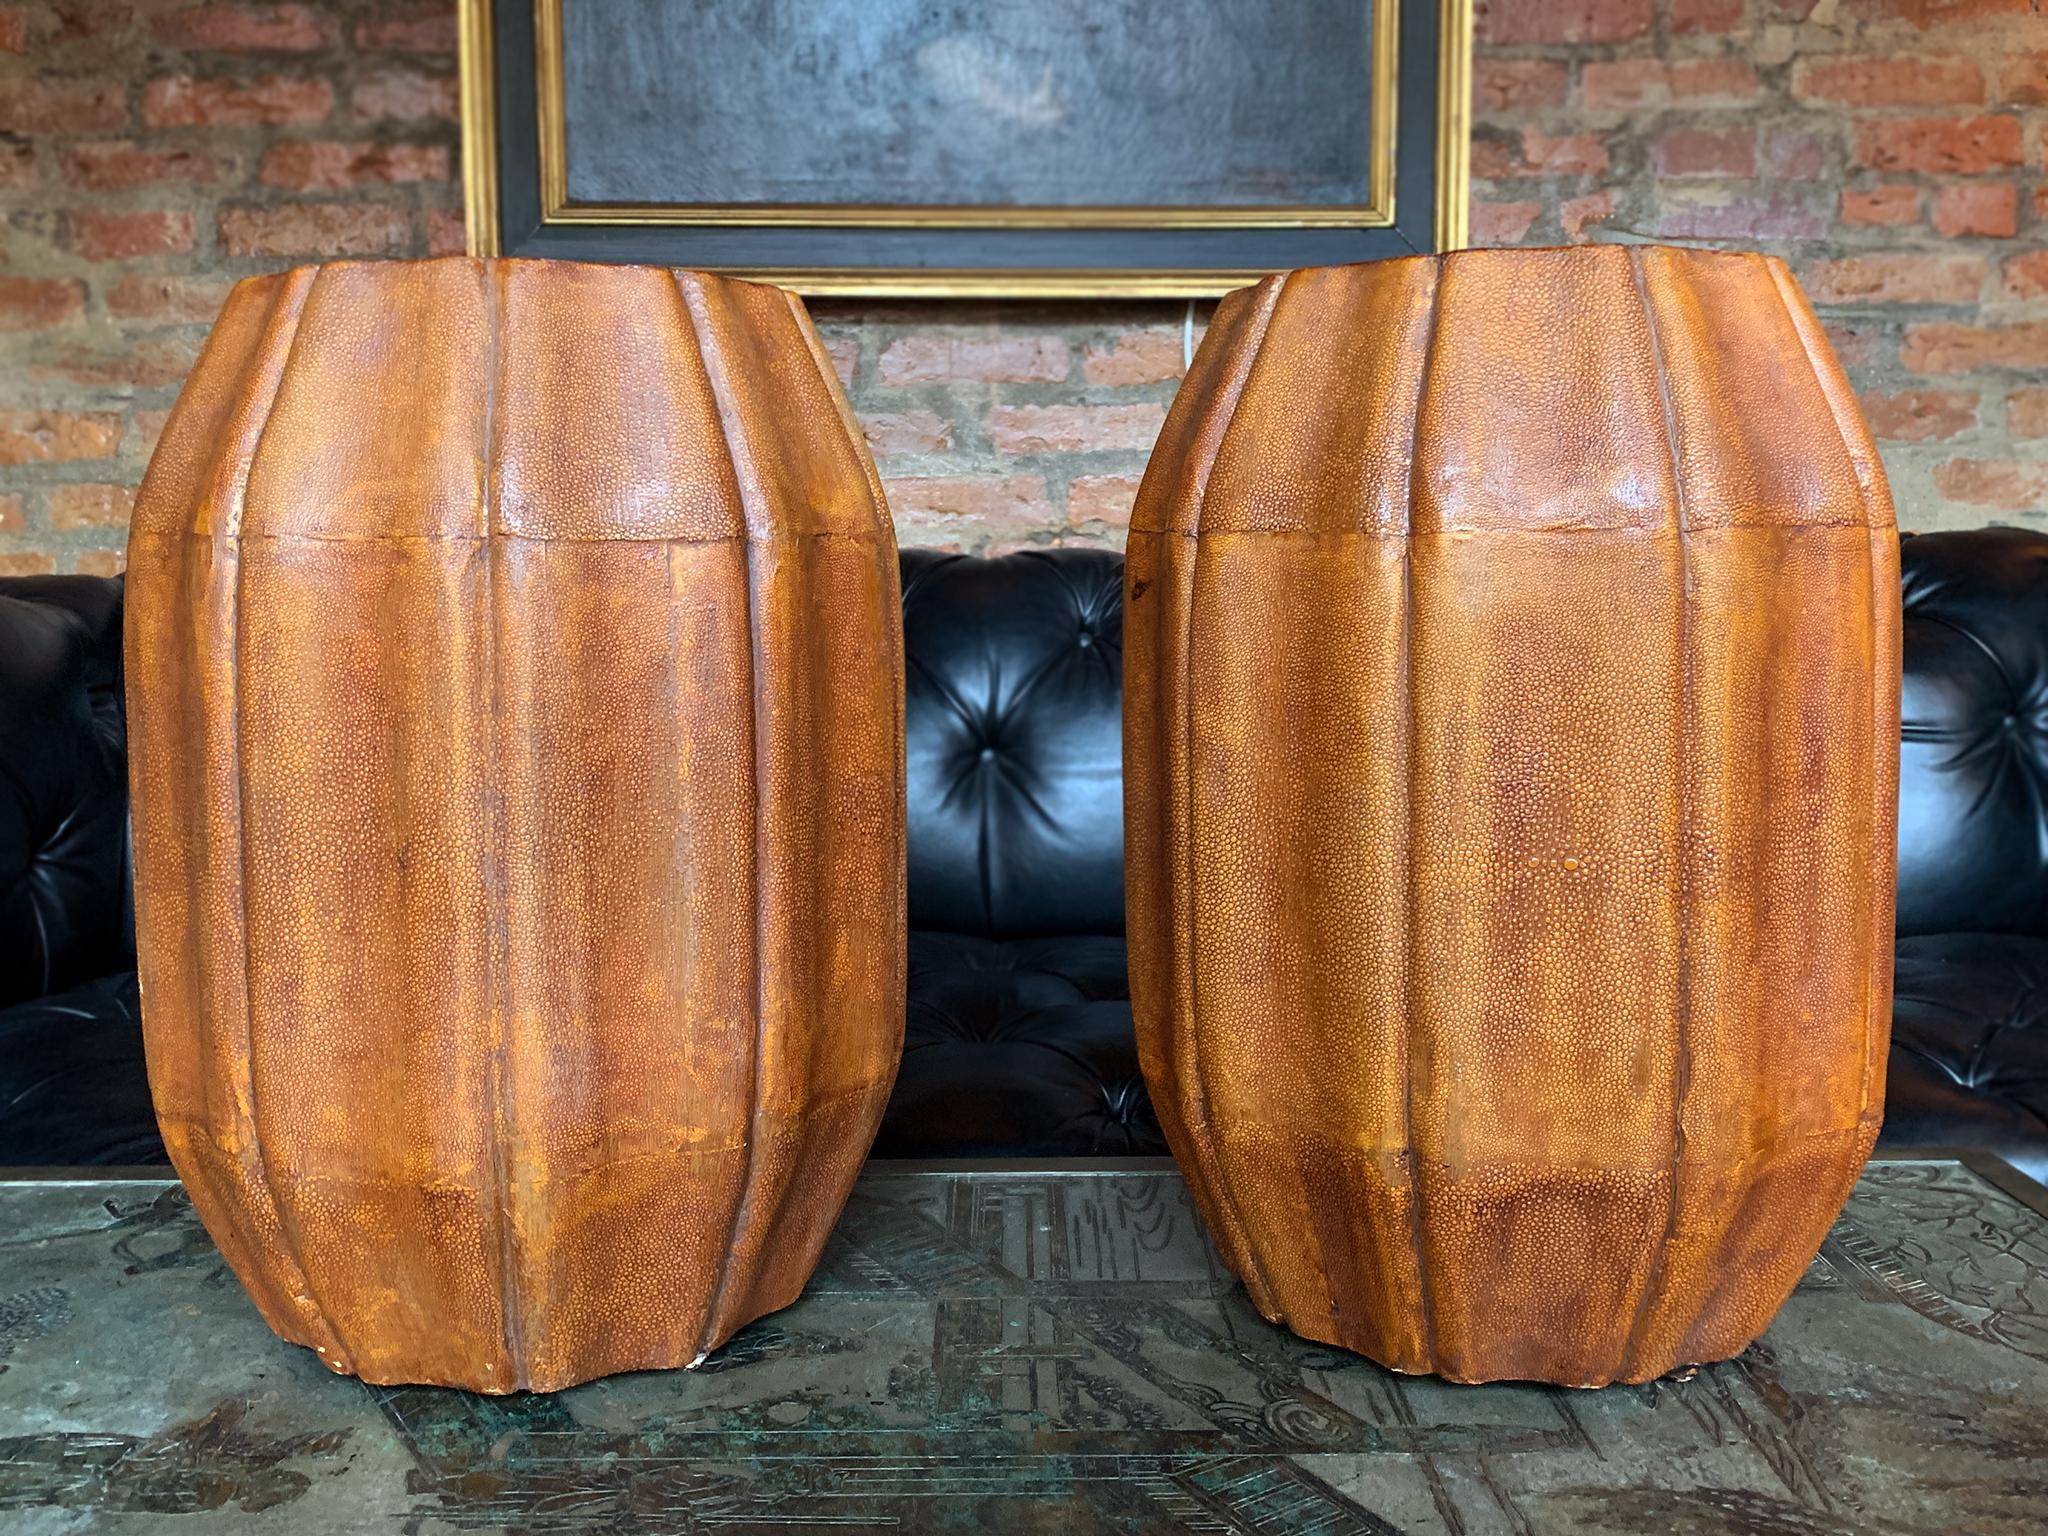 A pair of mid-20th century stools in the style of Karl Springer. Comprised of wood with shagreen wrap and black lacquered undersides. They have a very textured surface and an organic shape reminiscent of an orange squash with a flattened top and